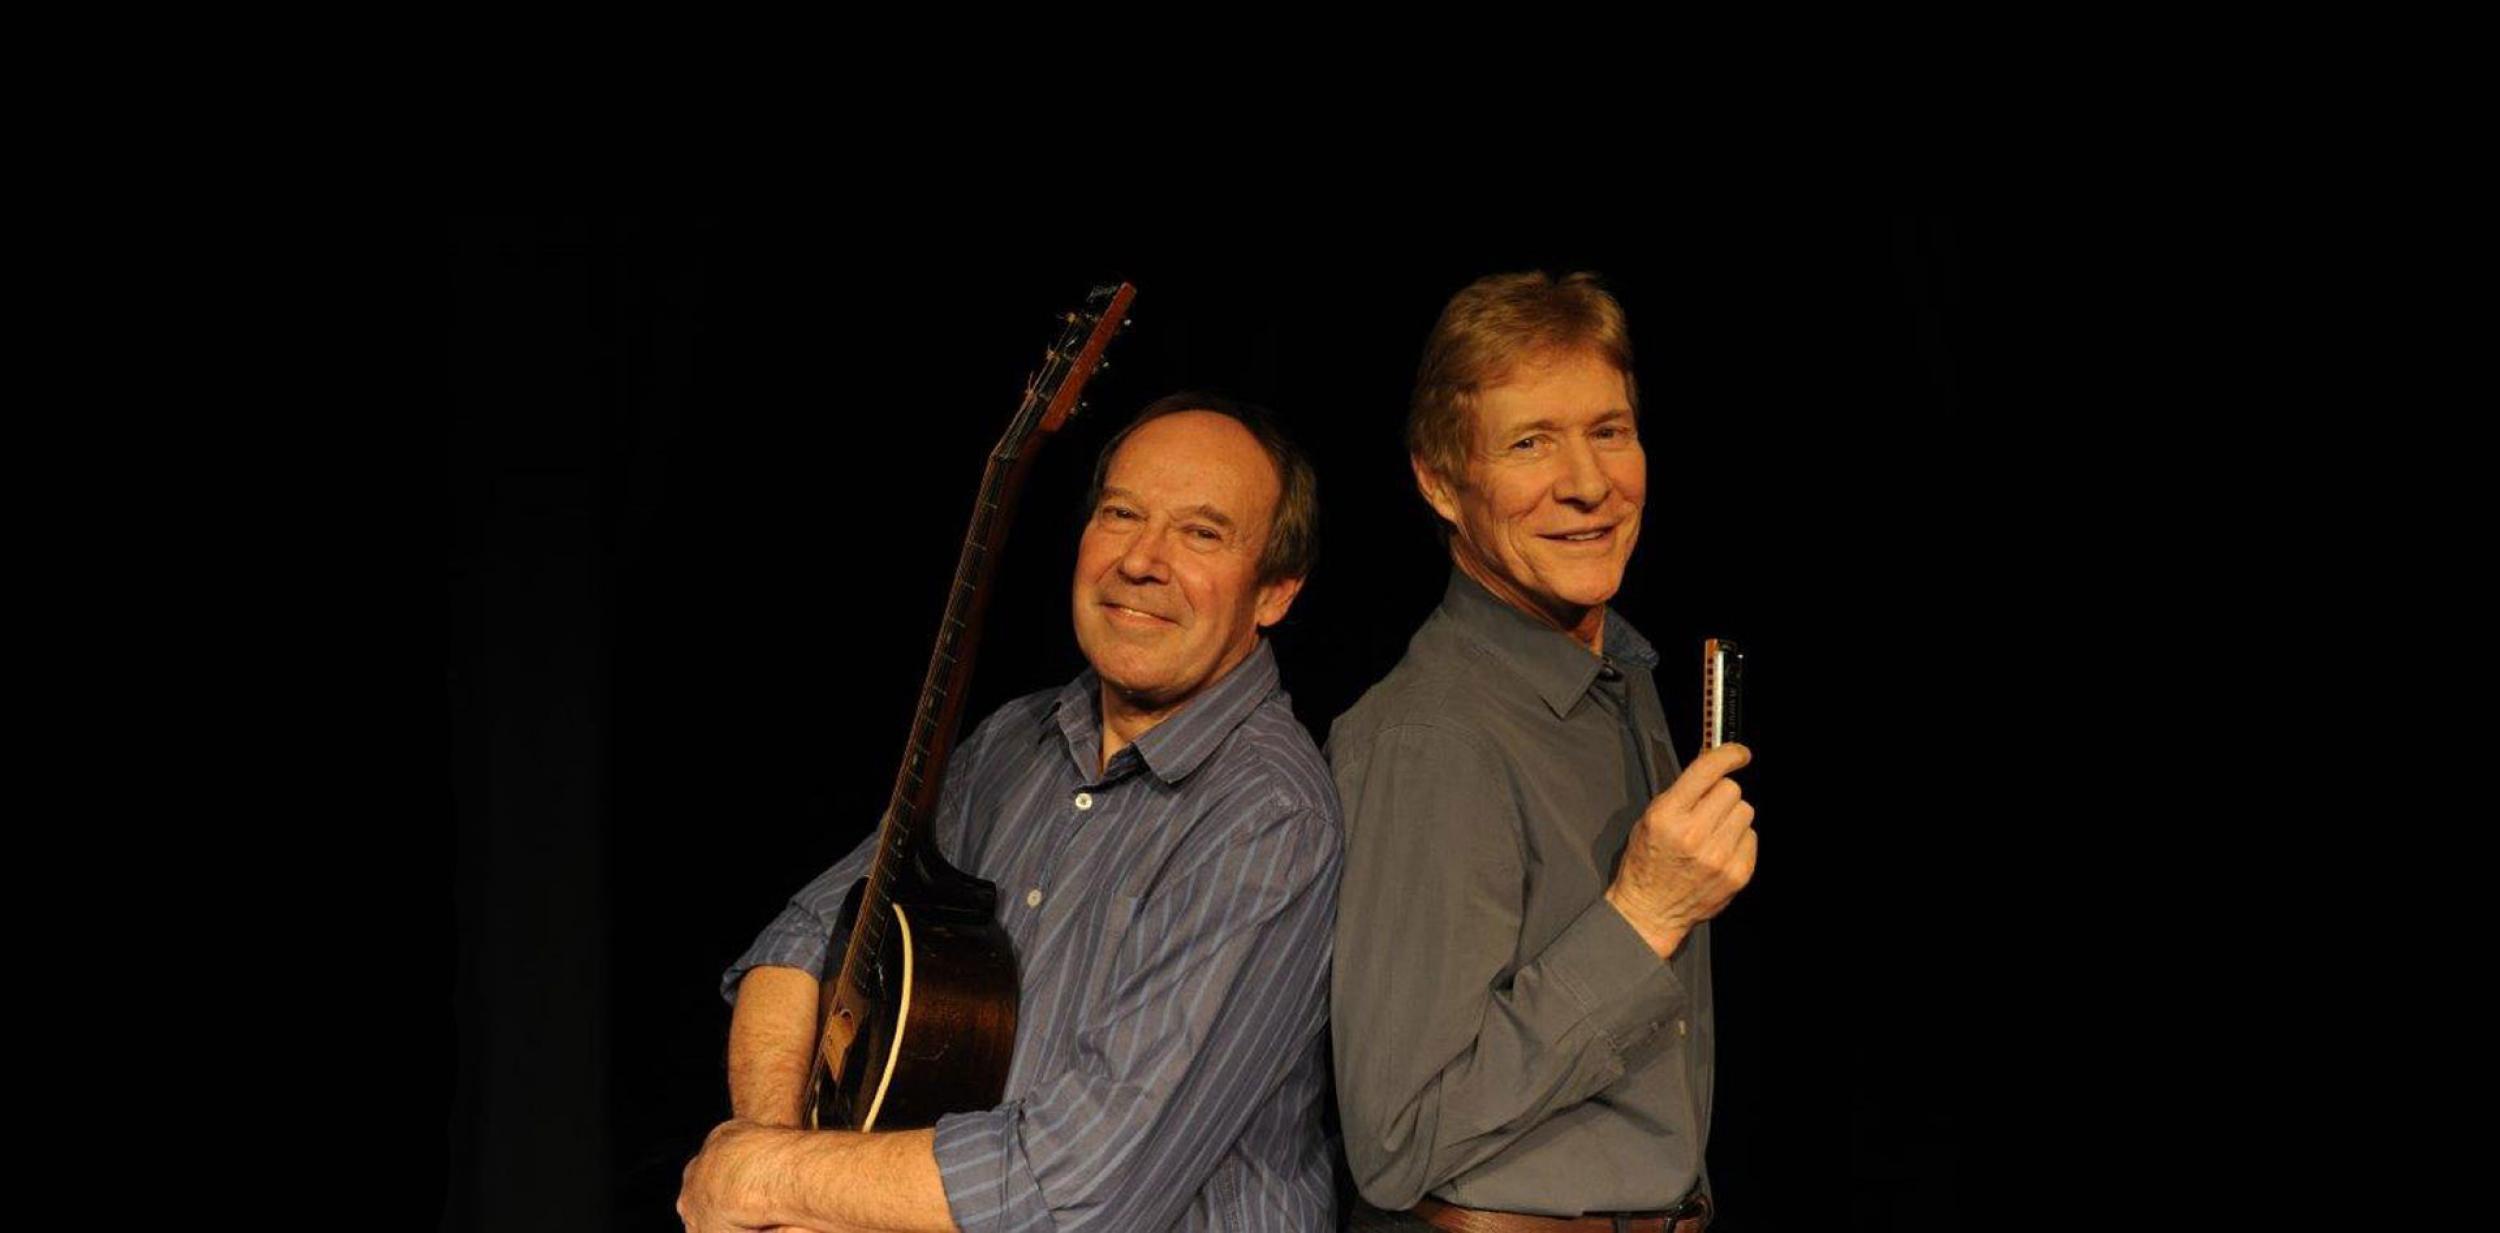 Paul Jones and Dave Kelly